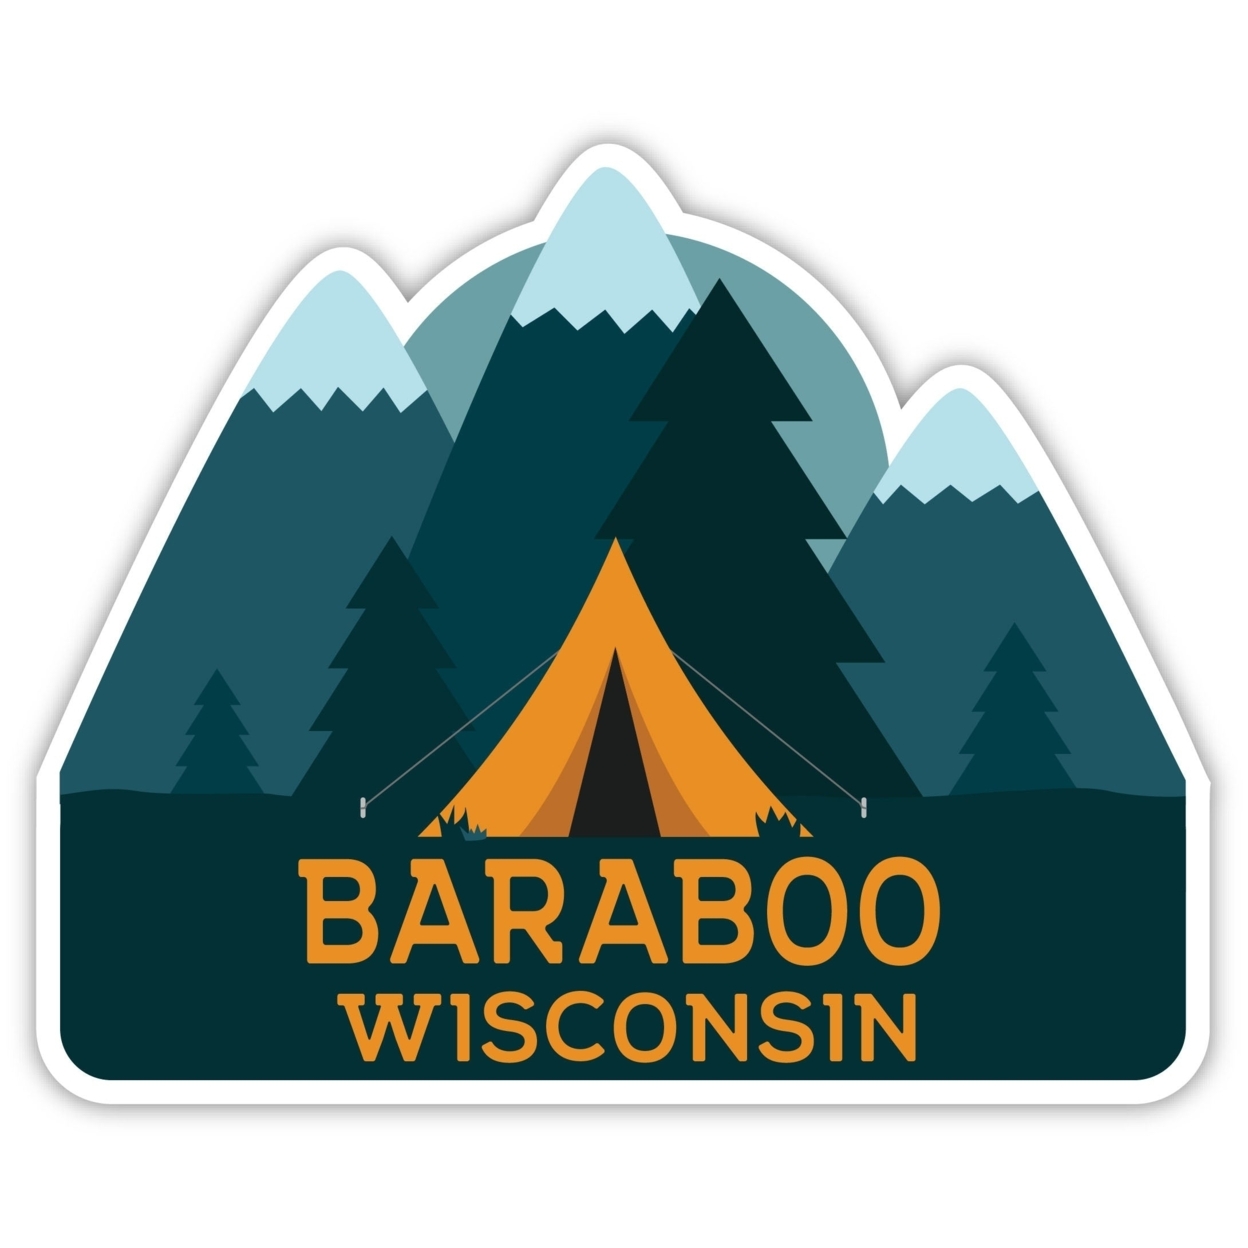 Baraboo Wisconsin Souvenir Decorative Stickers (Choose Theme And Size) - 4-Pack, 2-Inch, Tent